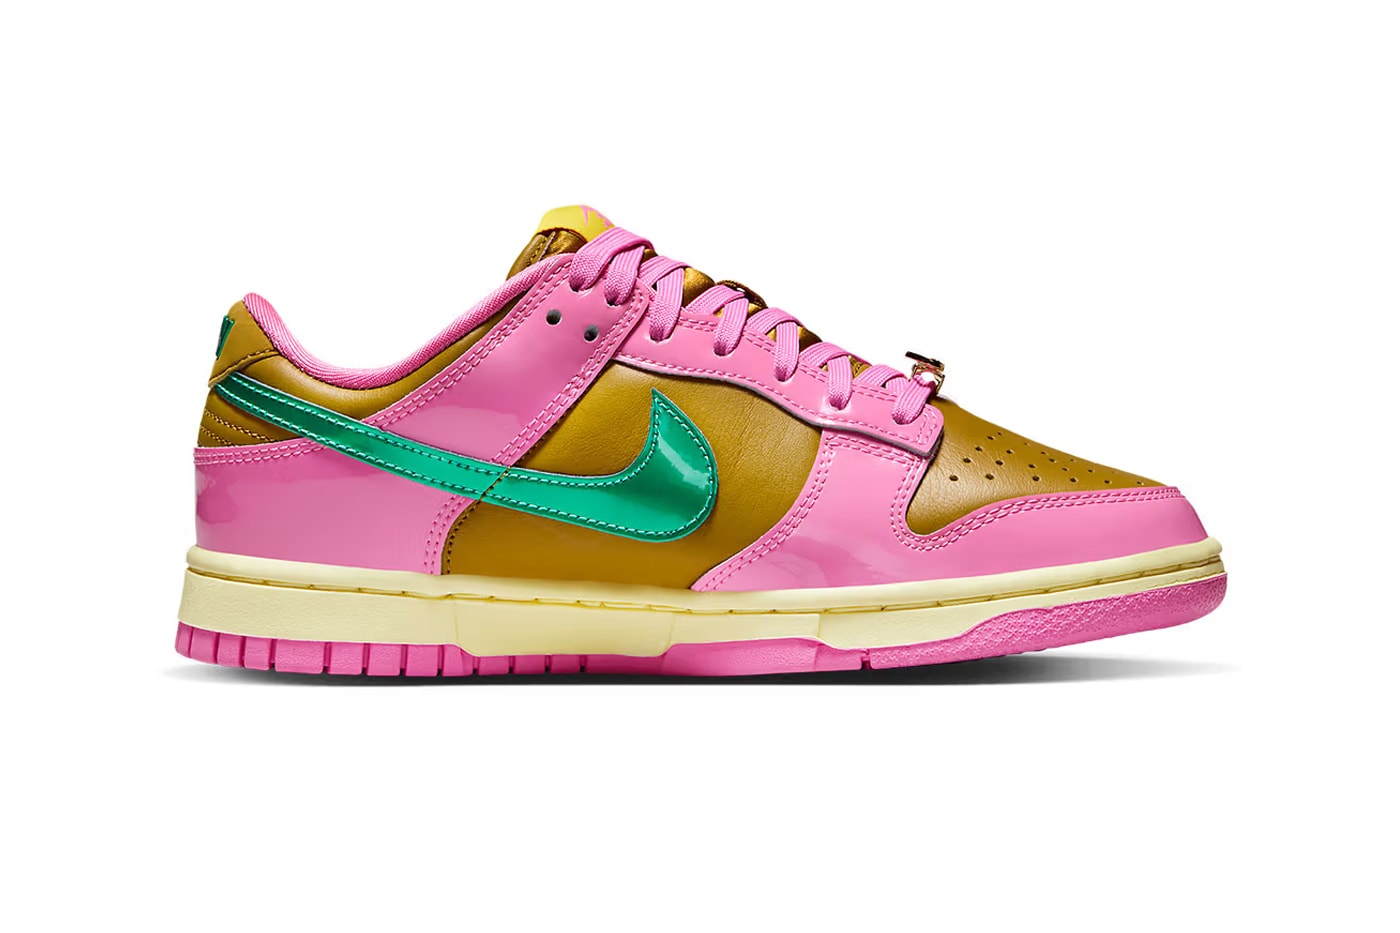 parris goebel nike dunk low FN2721 600 release date info store list buying guide photos price 